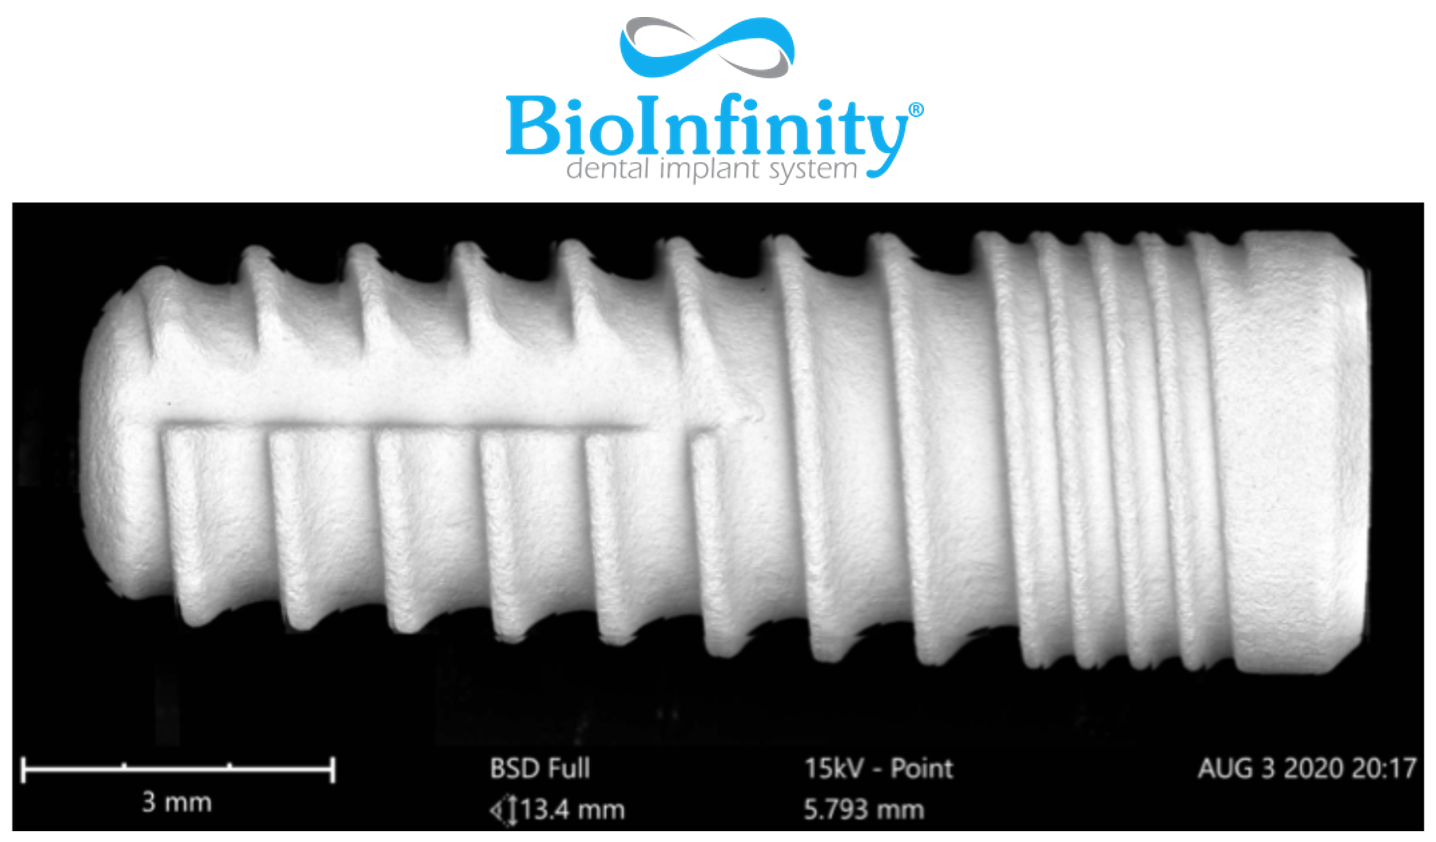 bioinfinity-avp-medical-technology-clean-implant